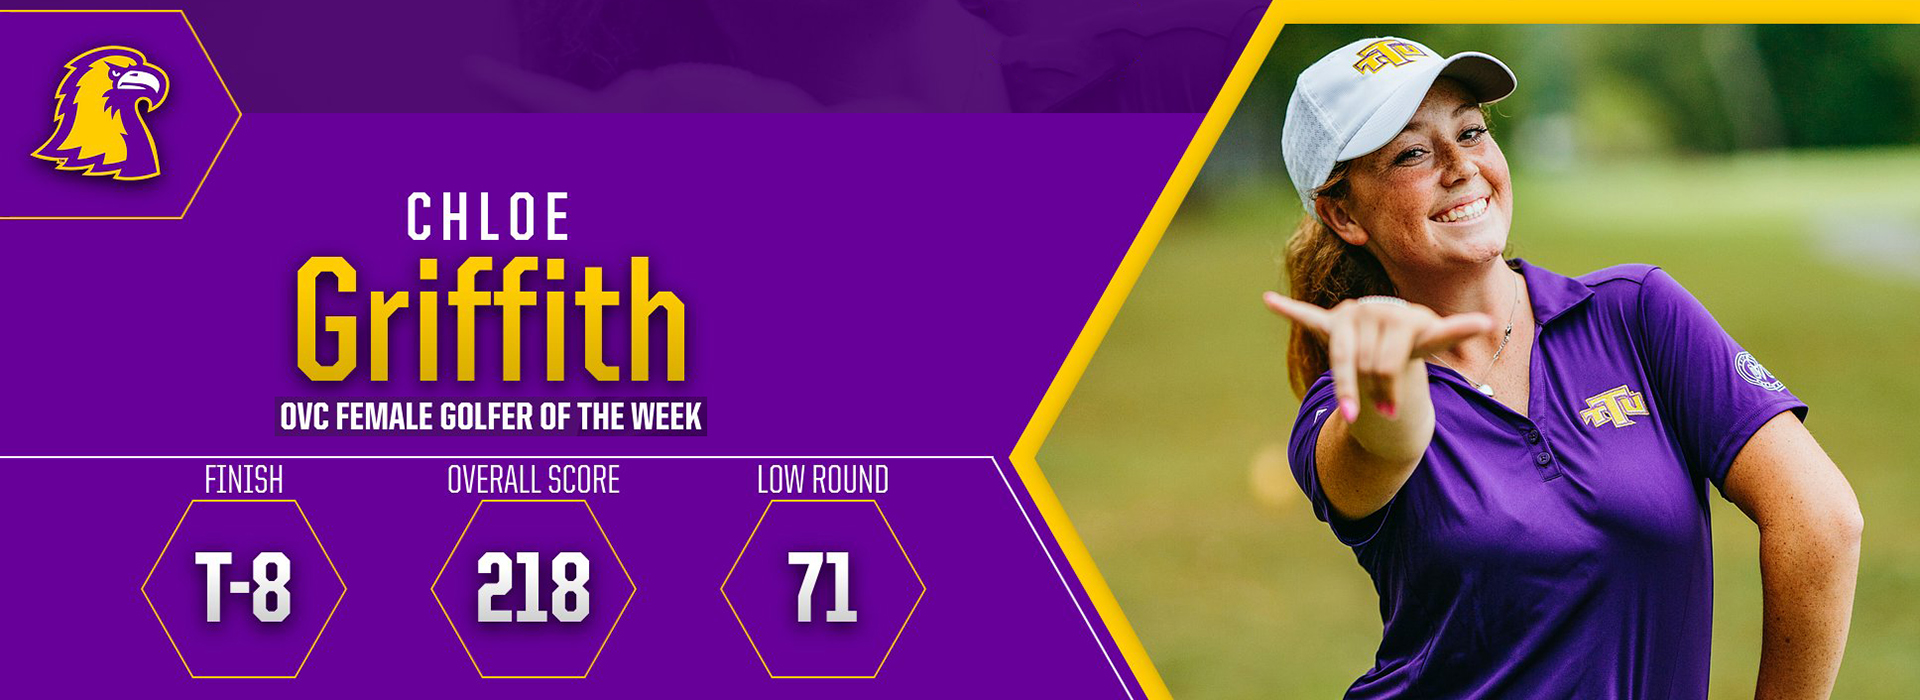 Griffith collects first career OVC Female Golfer of the Week honors